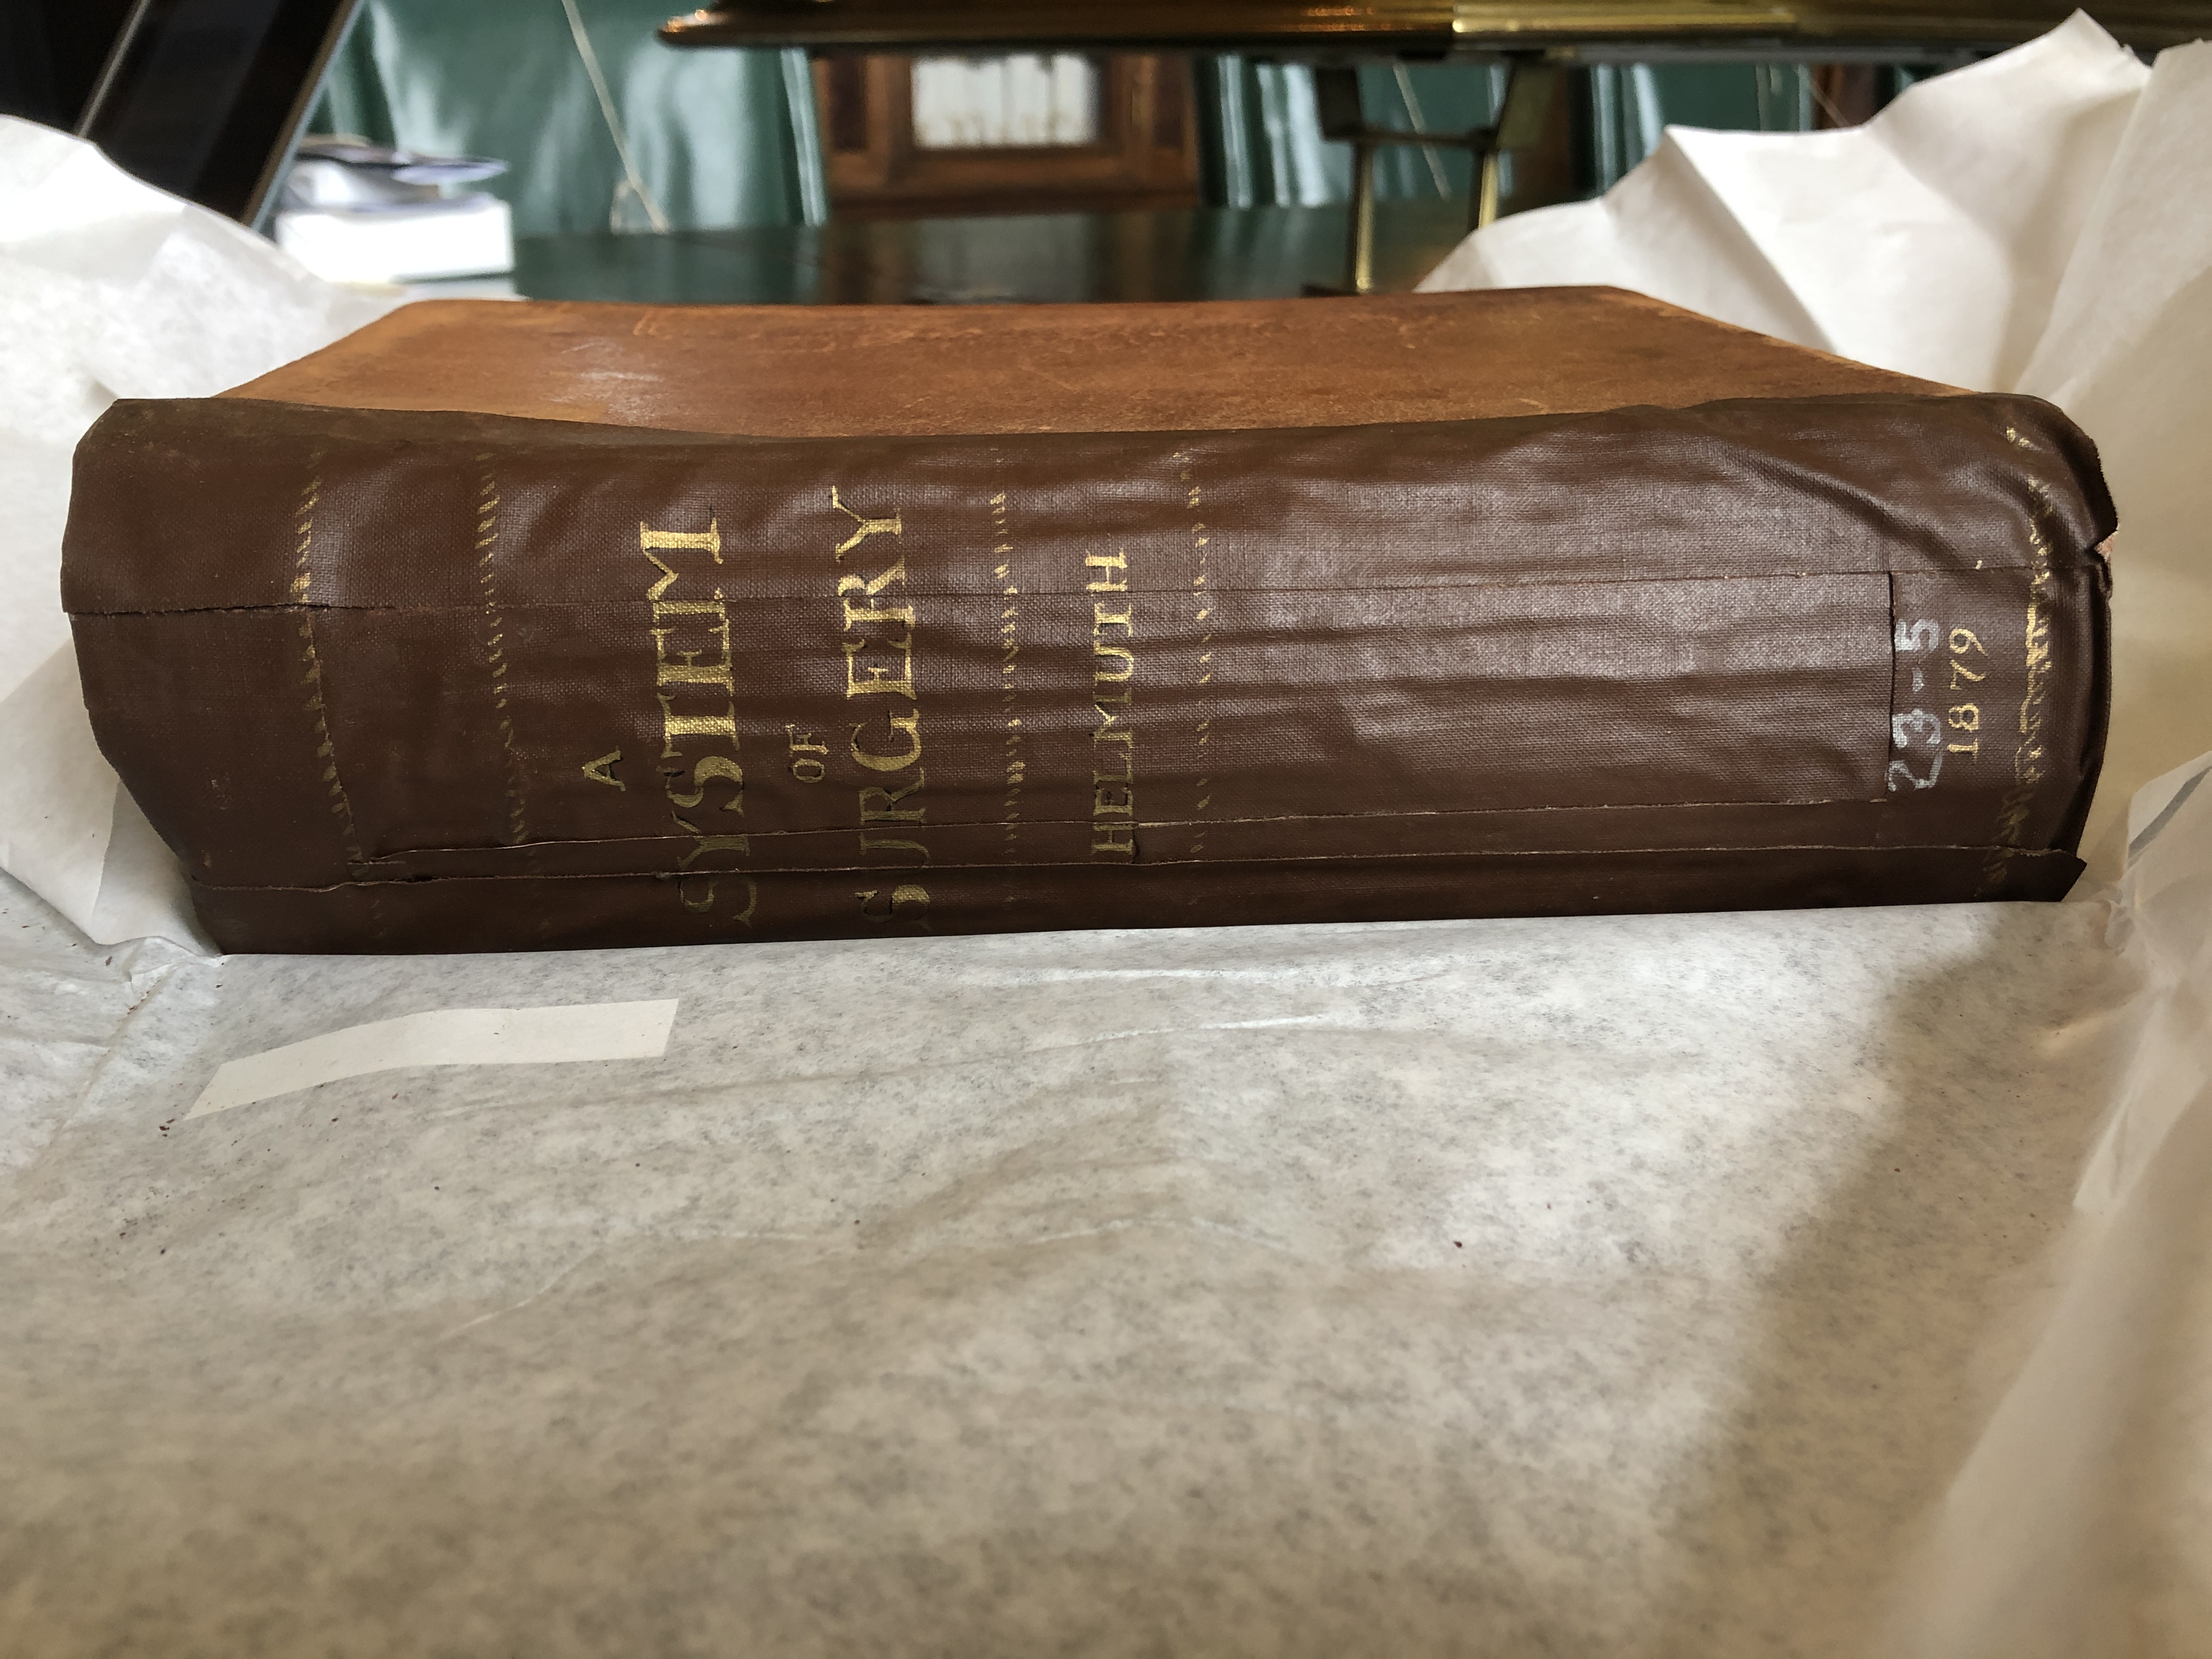 Antique brown book lays on tissue paper spread across a table with spine viewable, which reads the title of the book: “A System of Surgery” by Helmuth, and includes publication date of 1879